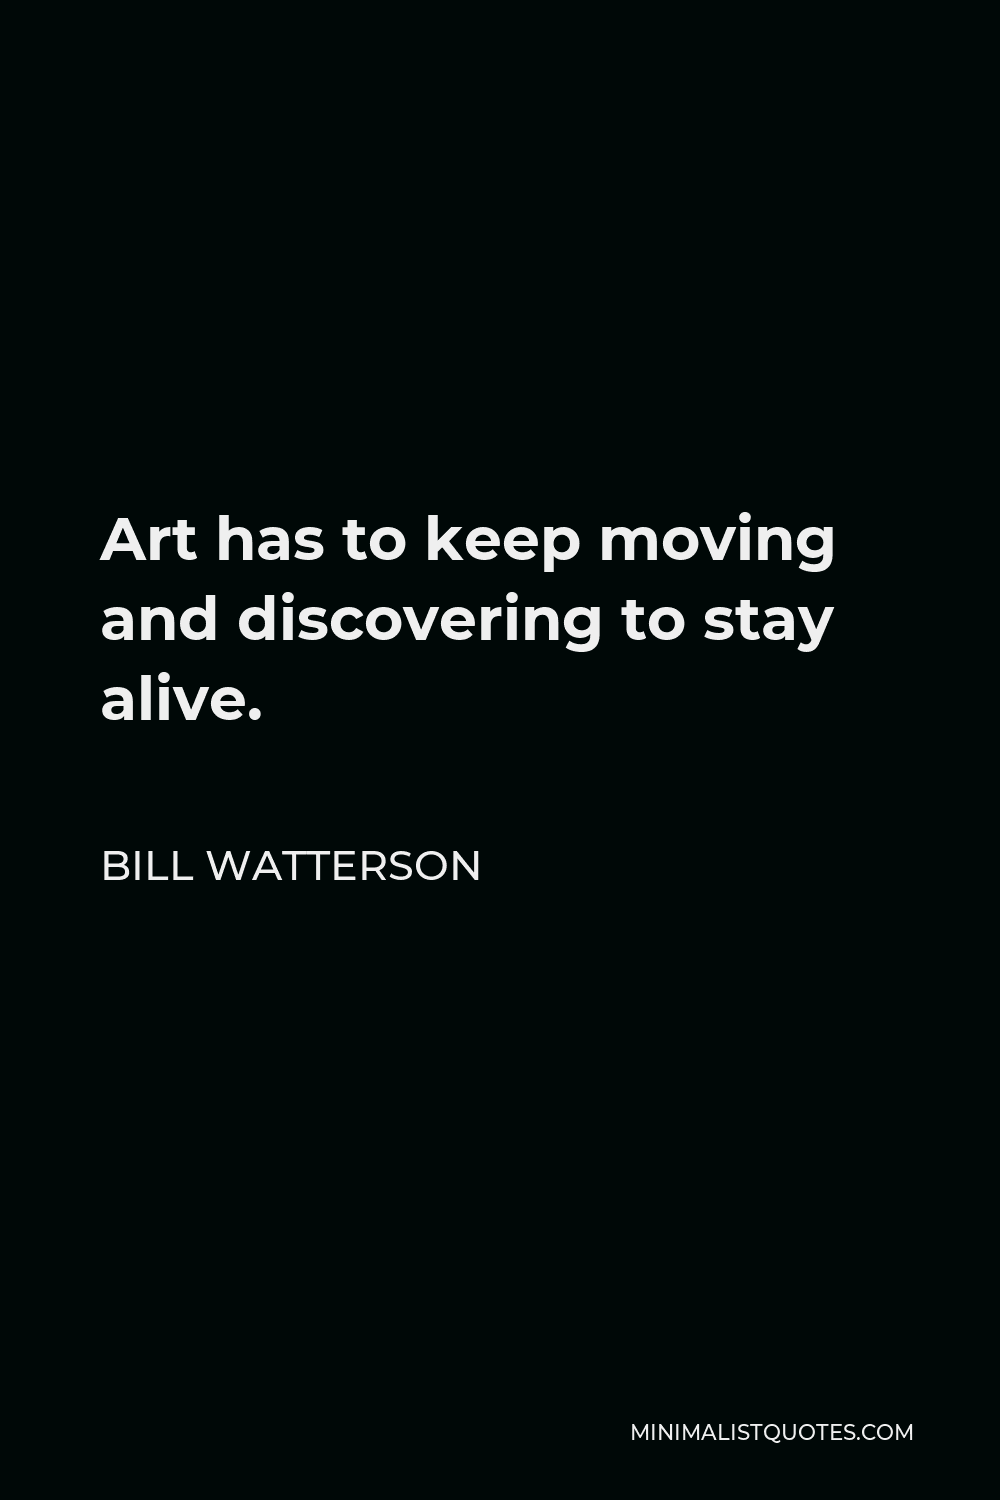 Bill Watterson Quote - Art has to keep moving and discovering to stay alive.